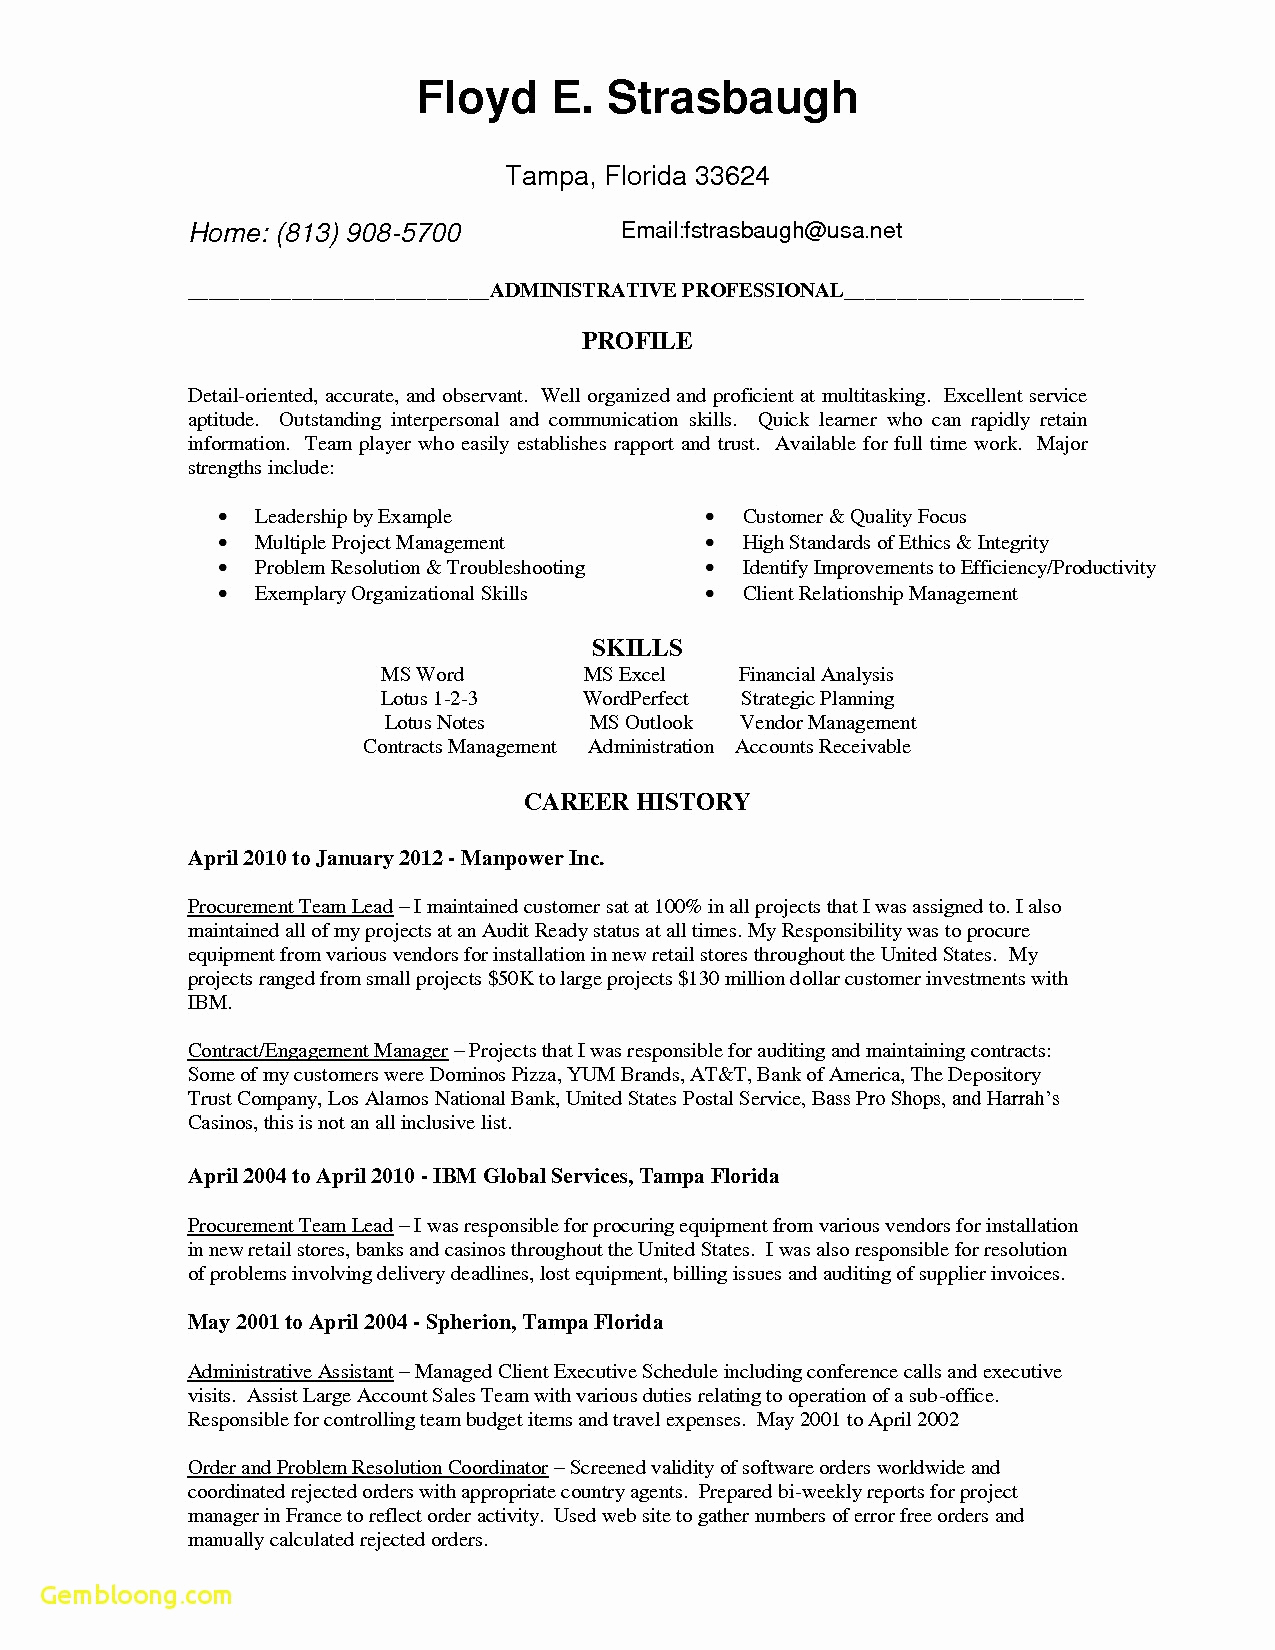 Resume and Cover Letter Template - Example Curriculum Vitae Best Fresh Resume Cover Letter